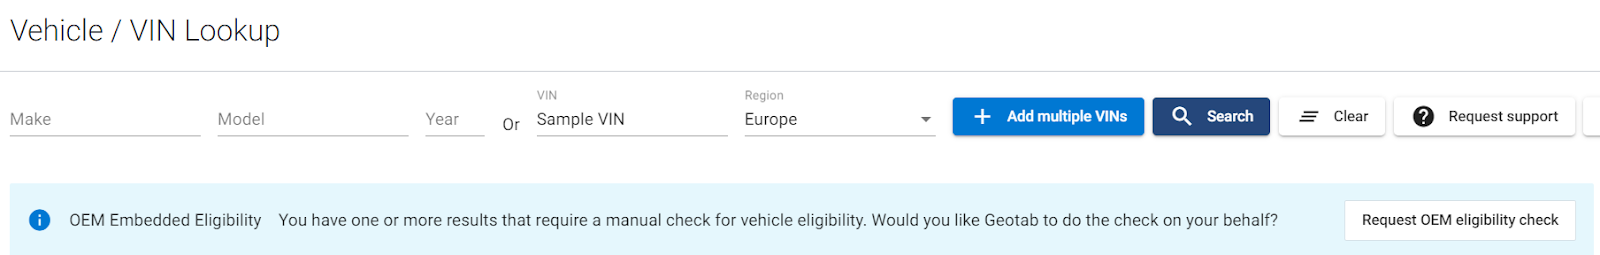 Vehicle/VIN Lookup page displaying a note for OEM Embedded Eligibility.